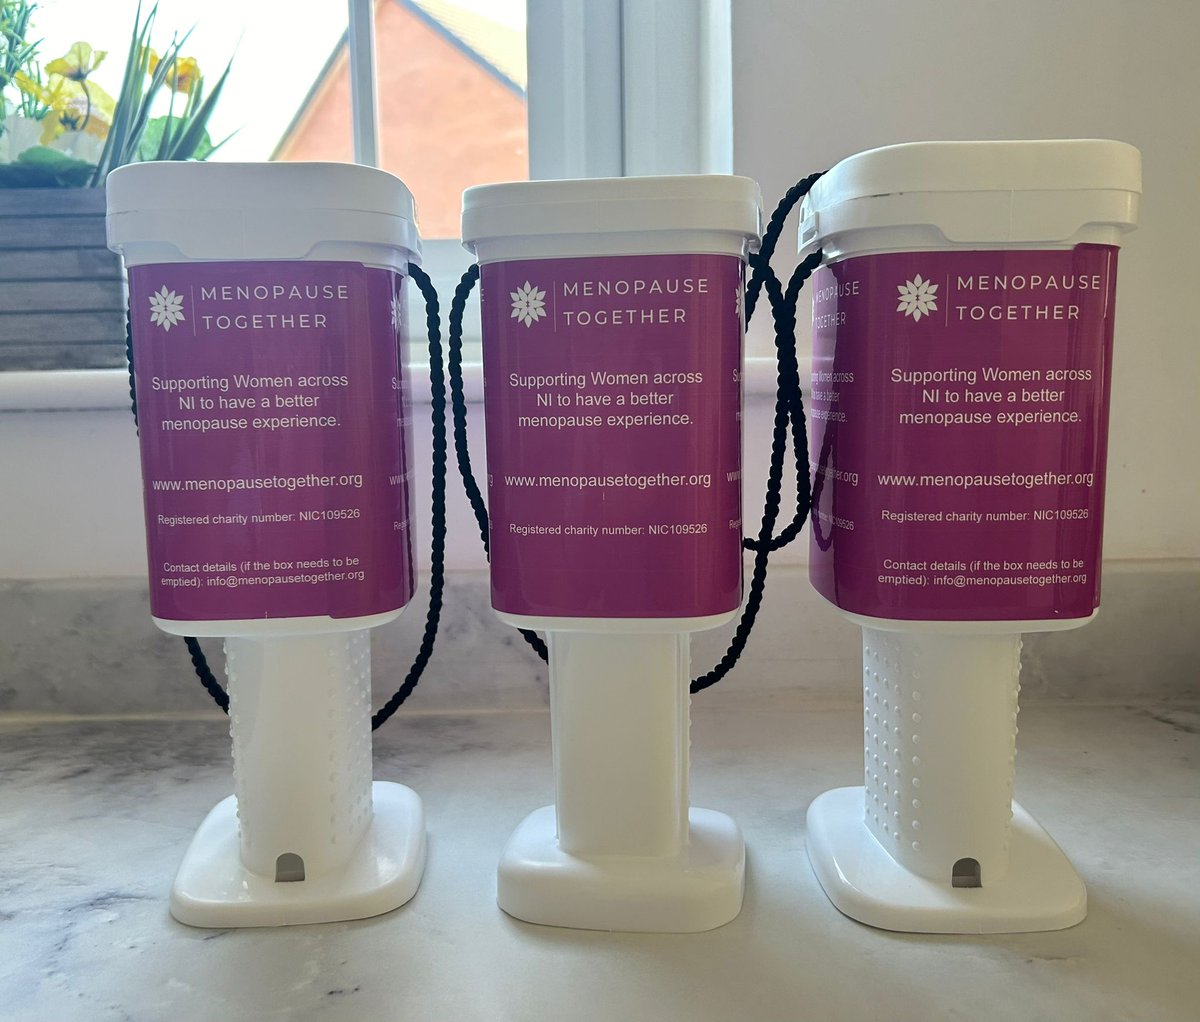 Well would you look at our new collection boxes 💜
#newcharity
#donations
#donationsmakeadifference 
#menopausetogether